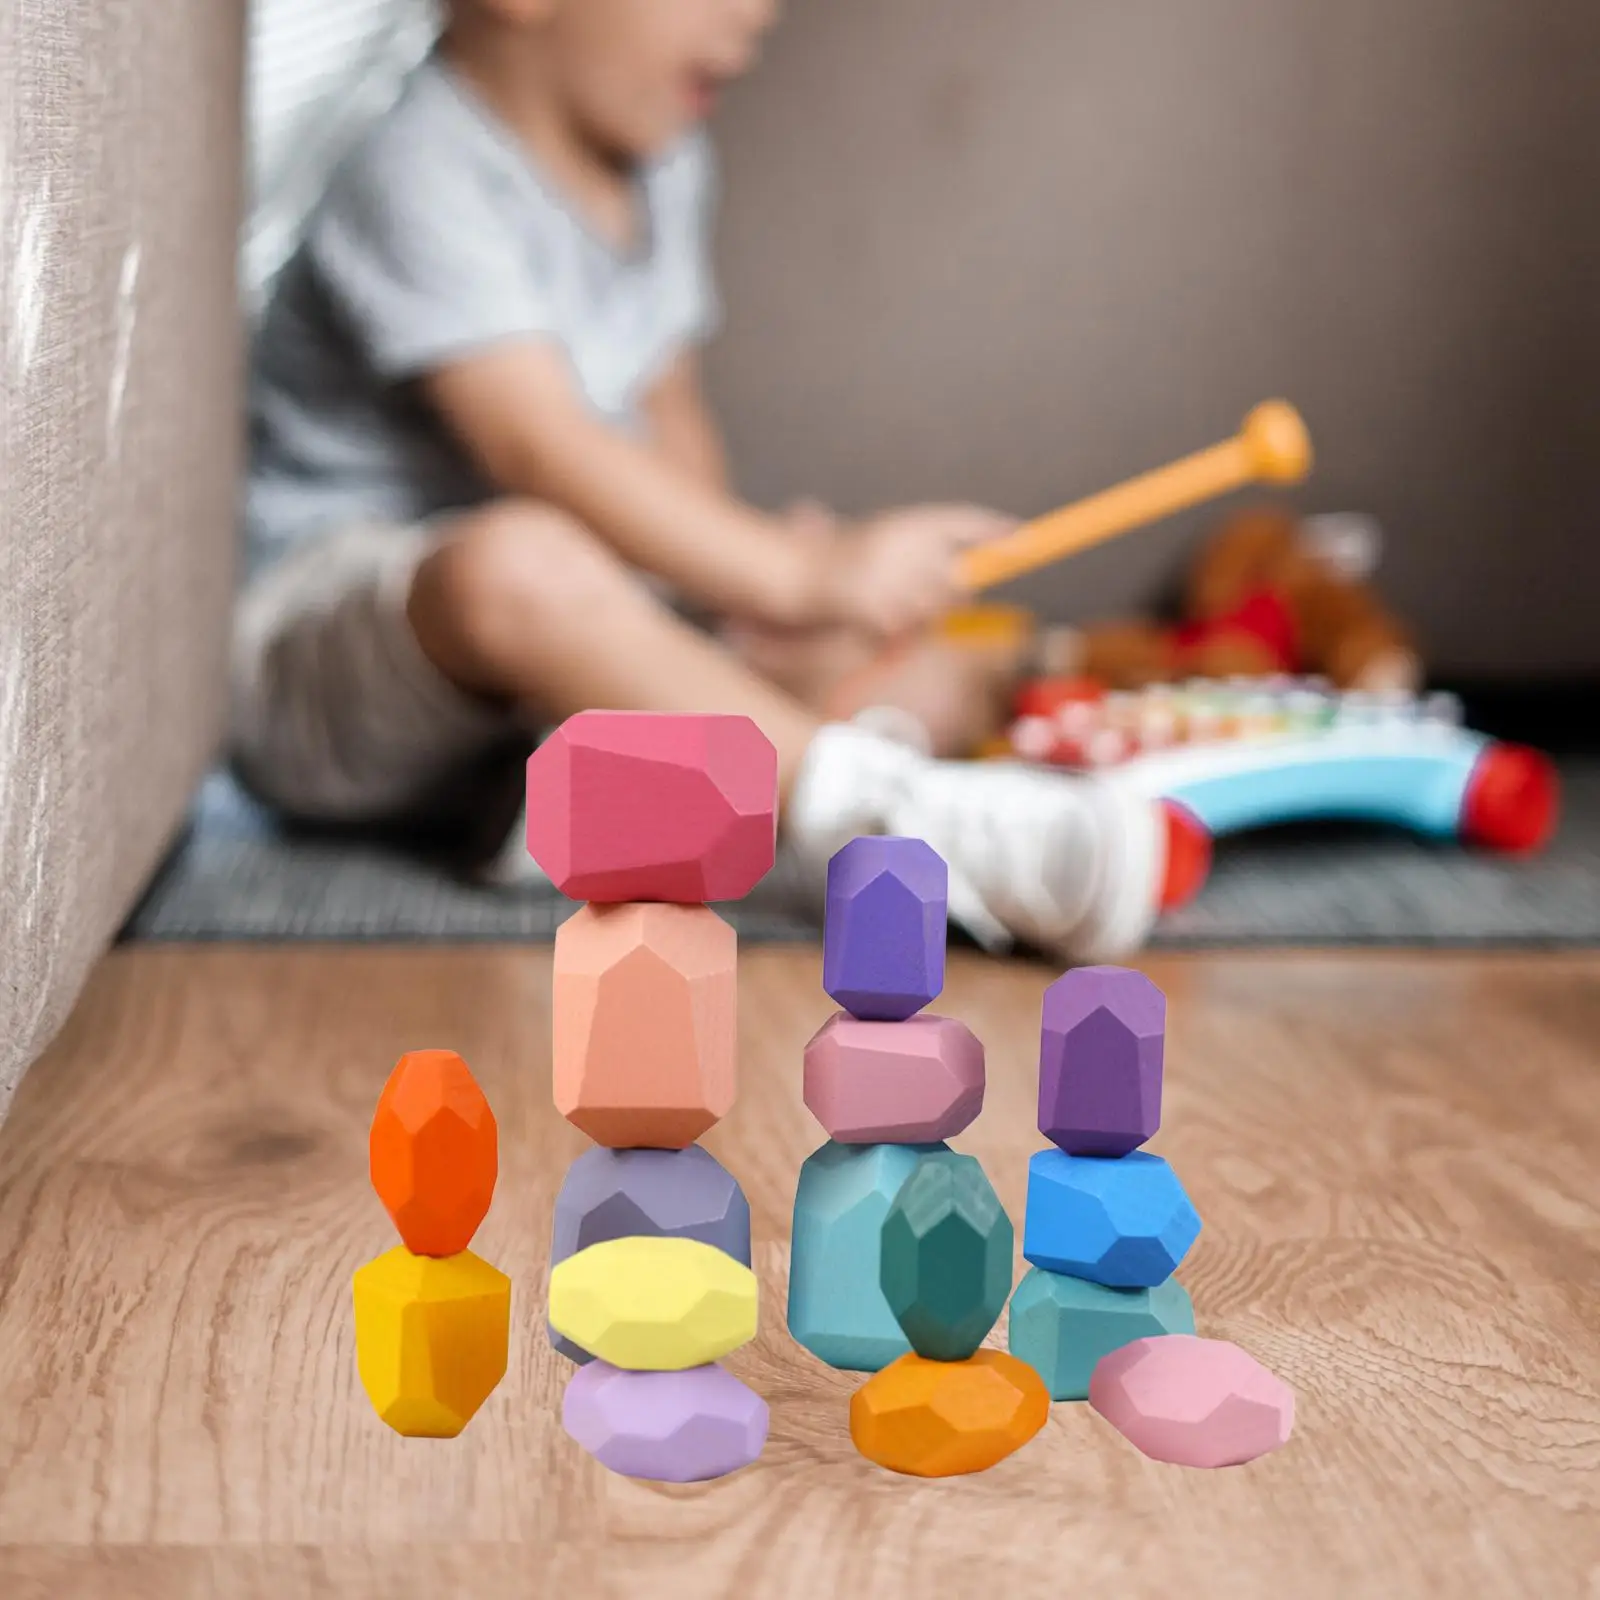 Wooden Balancing Stacking Stones Montessori Preschool Learning Lightweight Colorful Building Blocks Stacking Game for Children